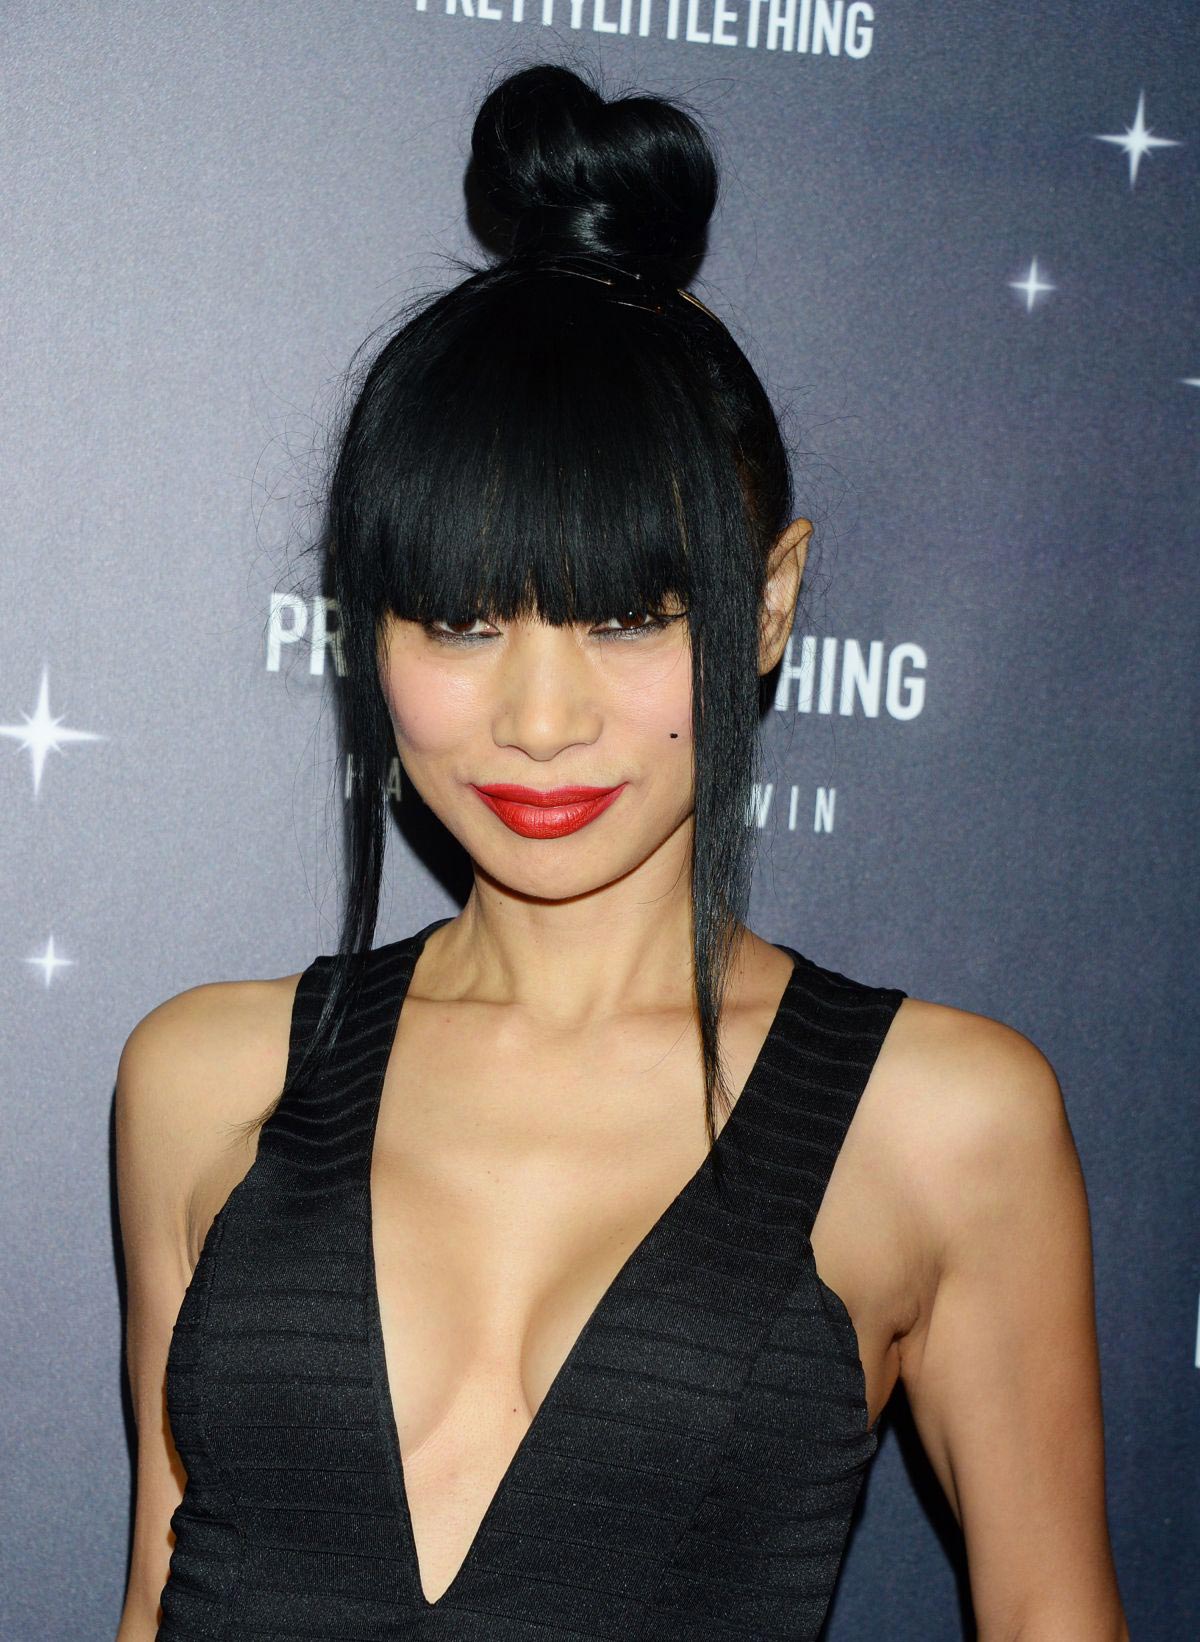 Bai Ling at PrettyLittleThing Starring Hailey Baldwin Event in Los Angeles 2018/11/05